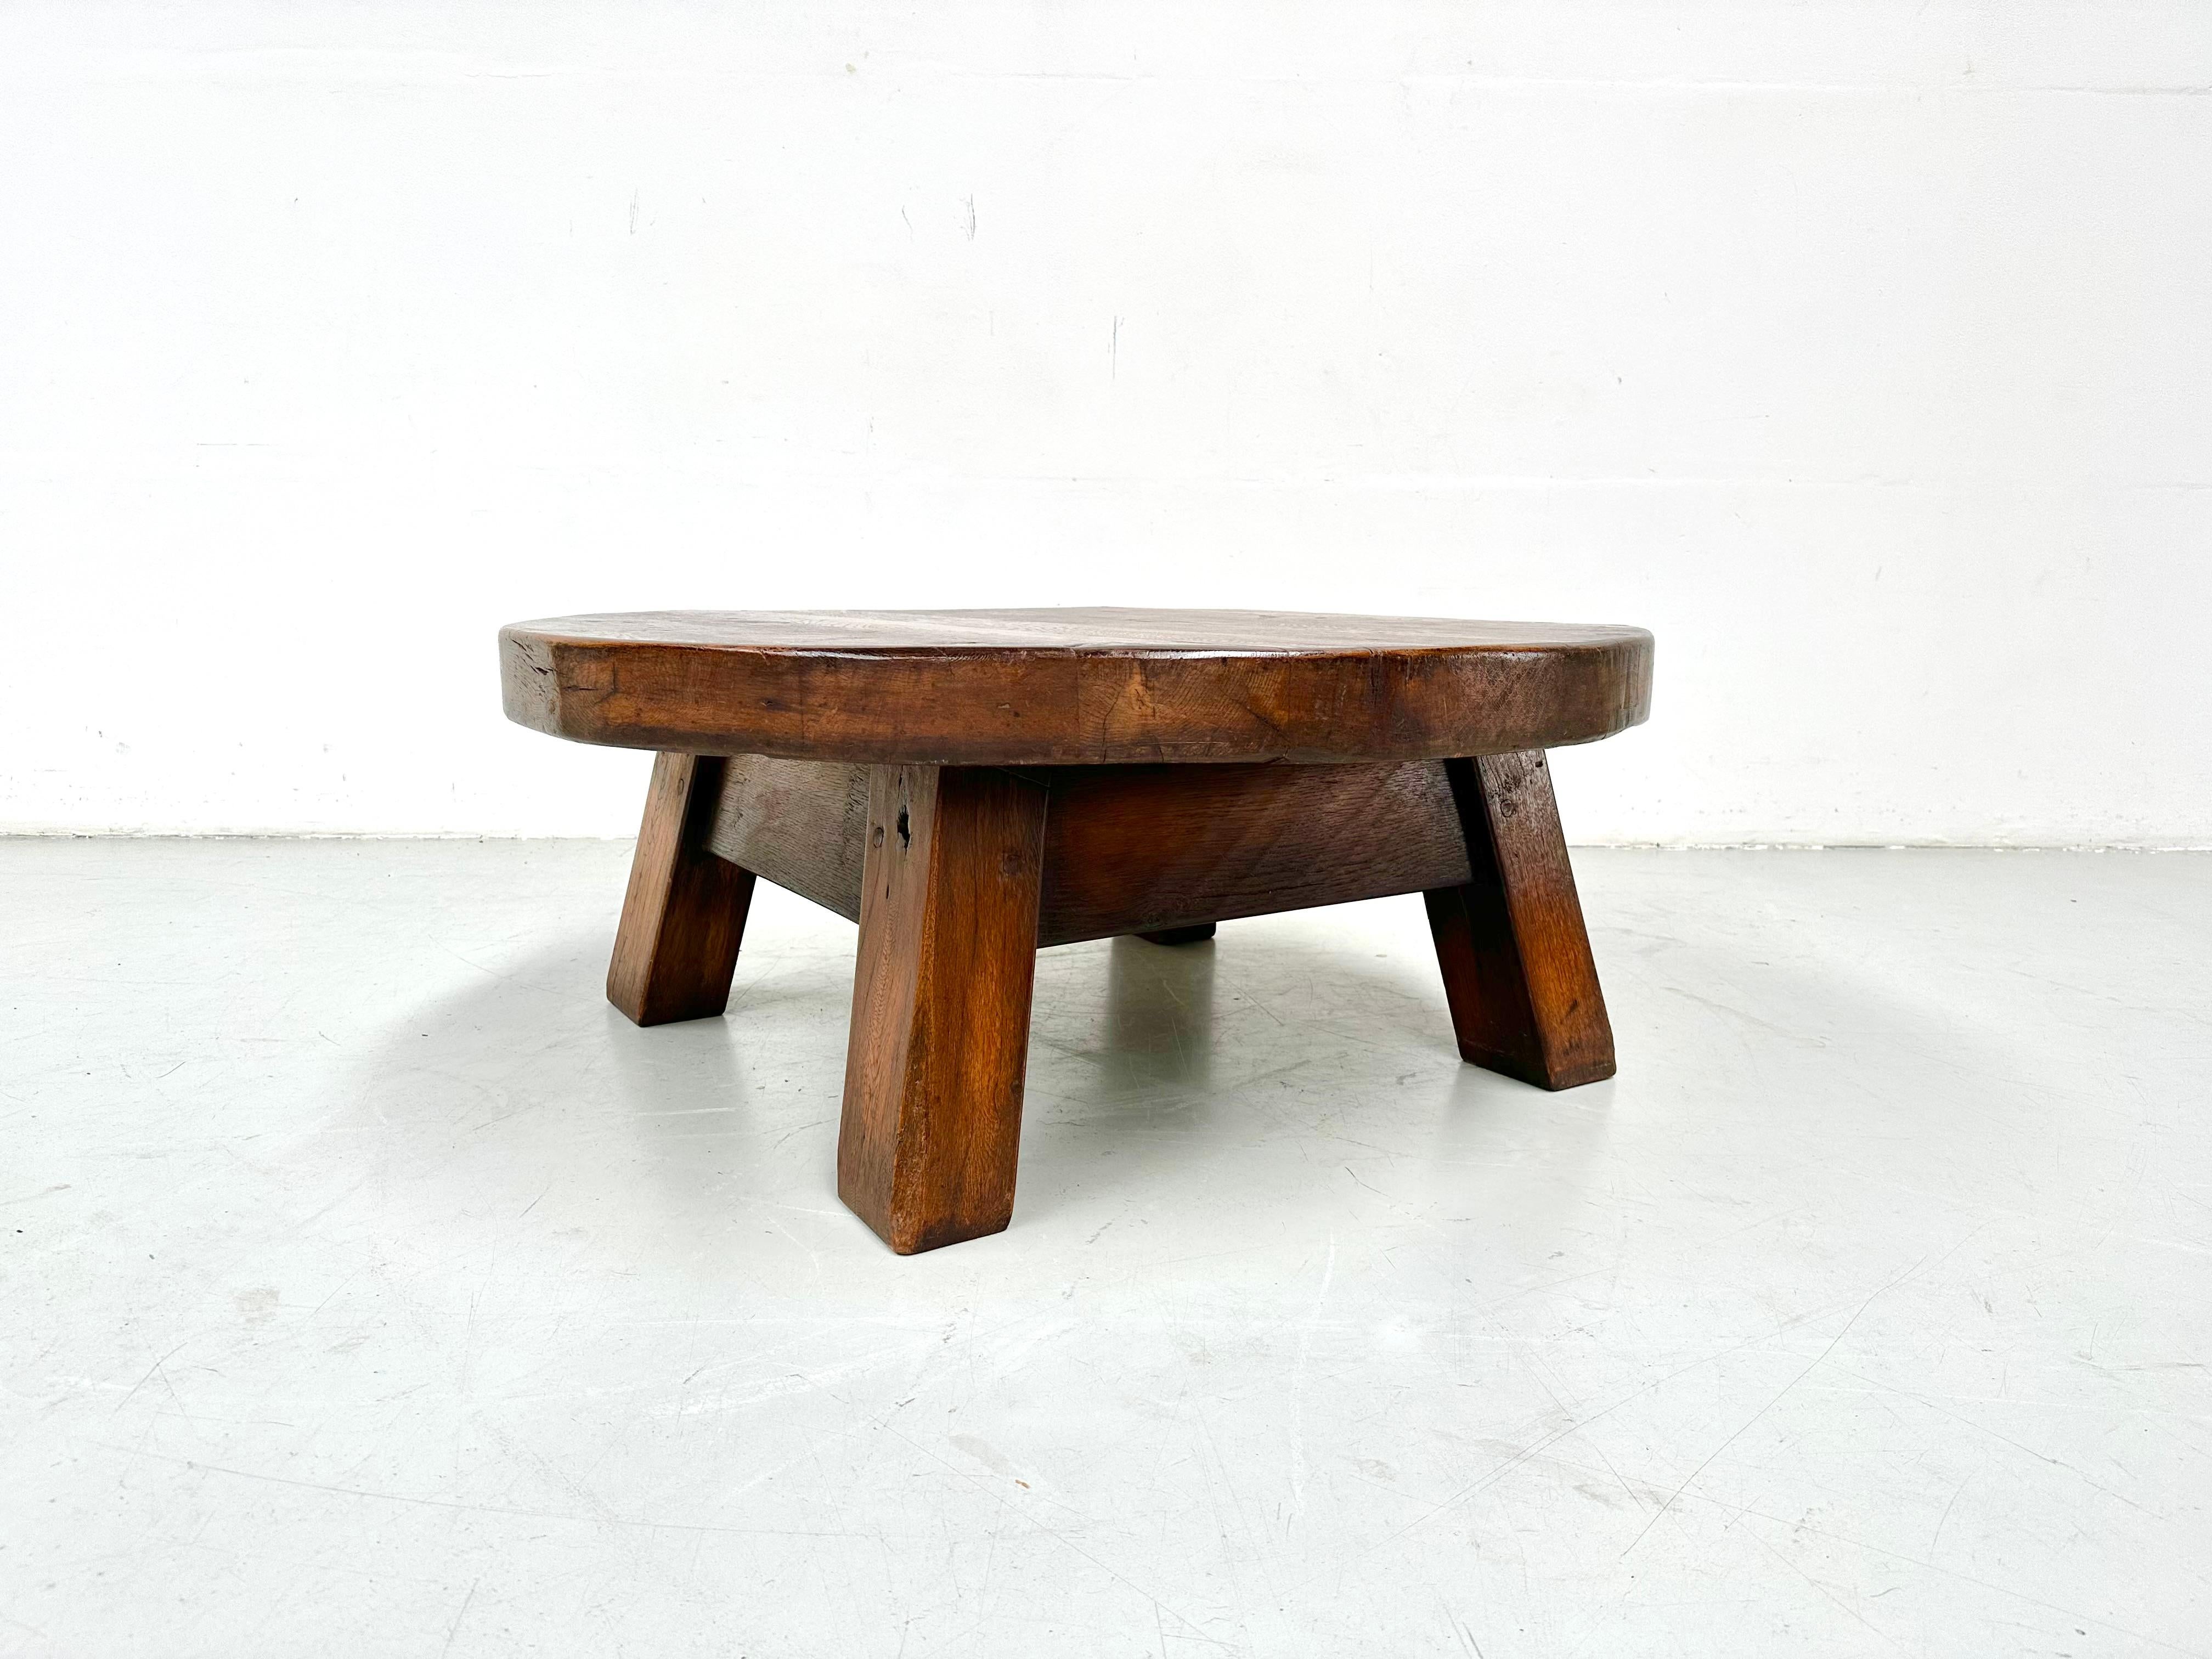 A stunning rural brutalist coffee table handmade in France around the twenties.

The table top is removable from the base and has a thickness of 3.54 inches.

In very good condition with great patina.